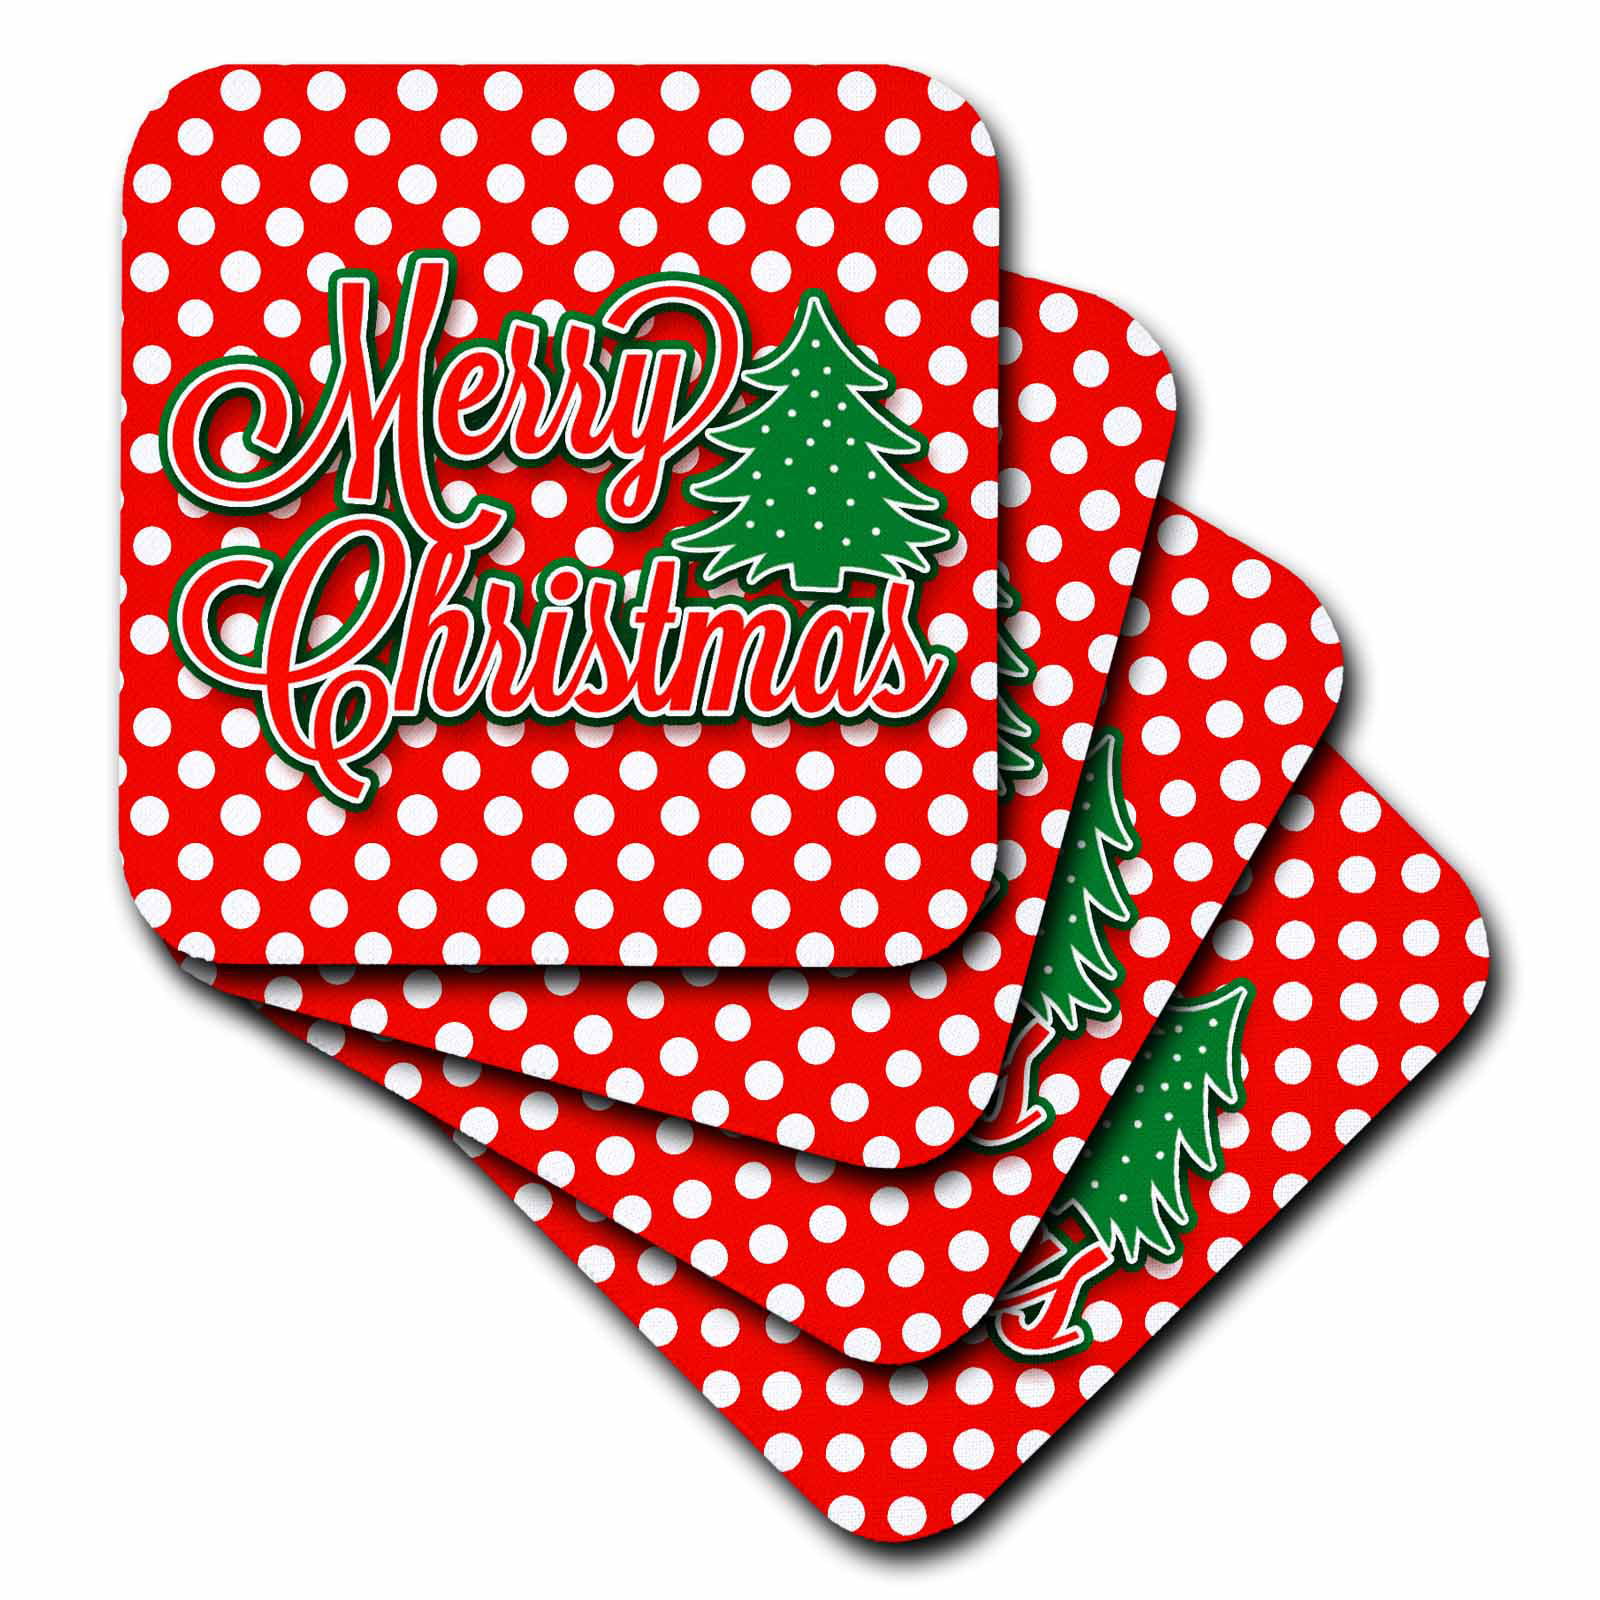 Download 3drose Merry Christmas Word Art Red And White Polka Dot With Green Tree Soft Coasters Set Of 8 Walmart Com Walmart Com